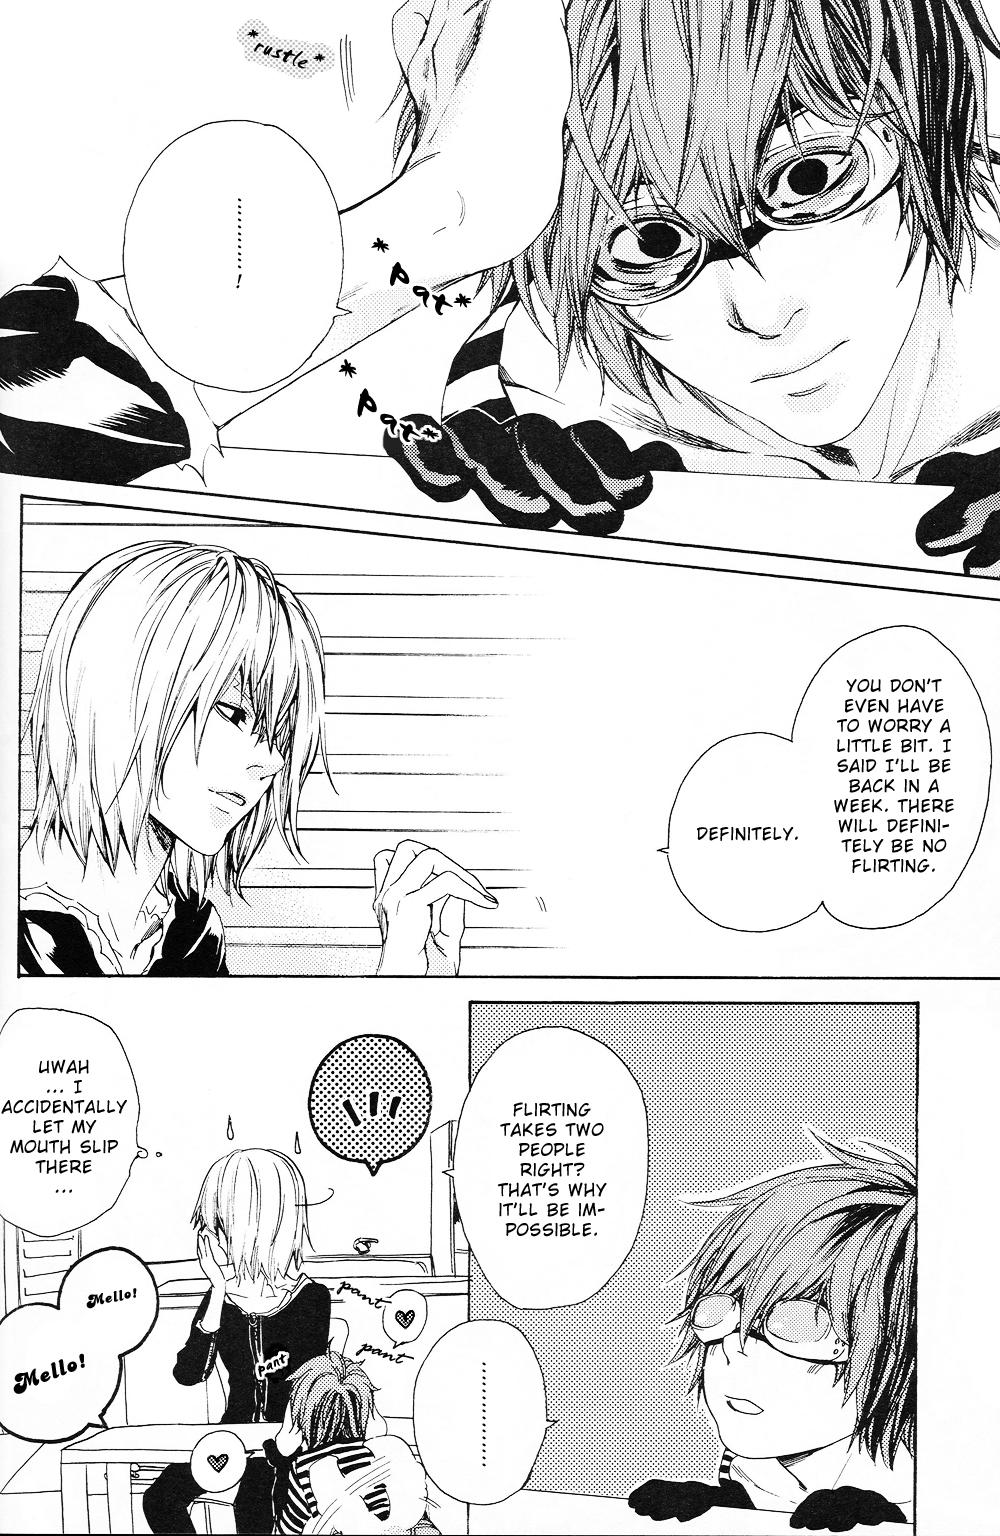 Rough Death Note - Love Traveling - Death note Close - Page 8